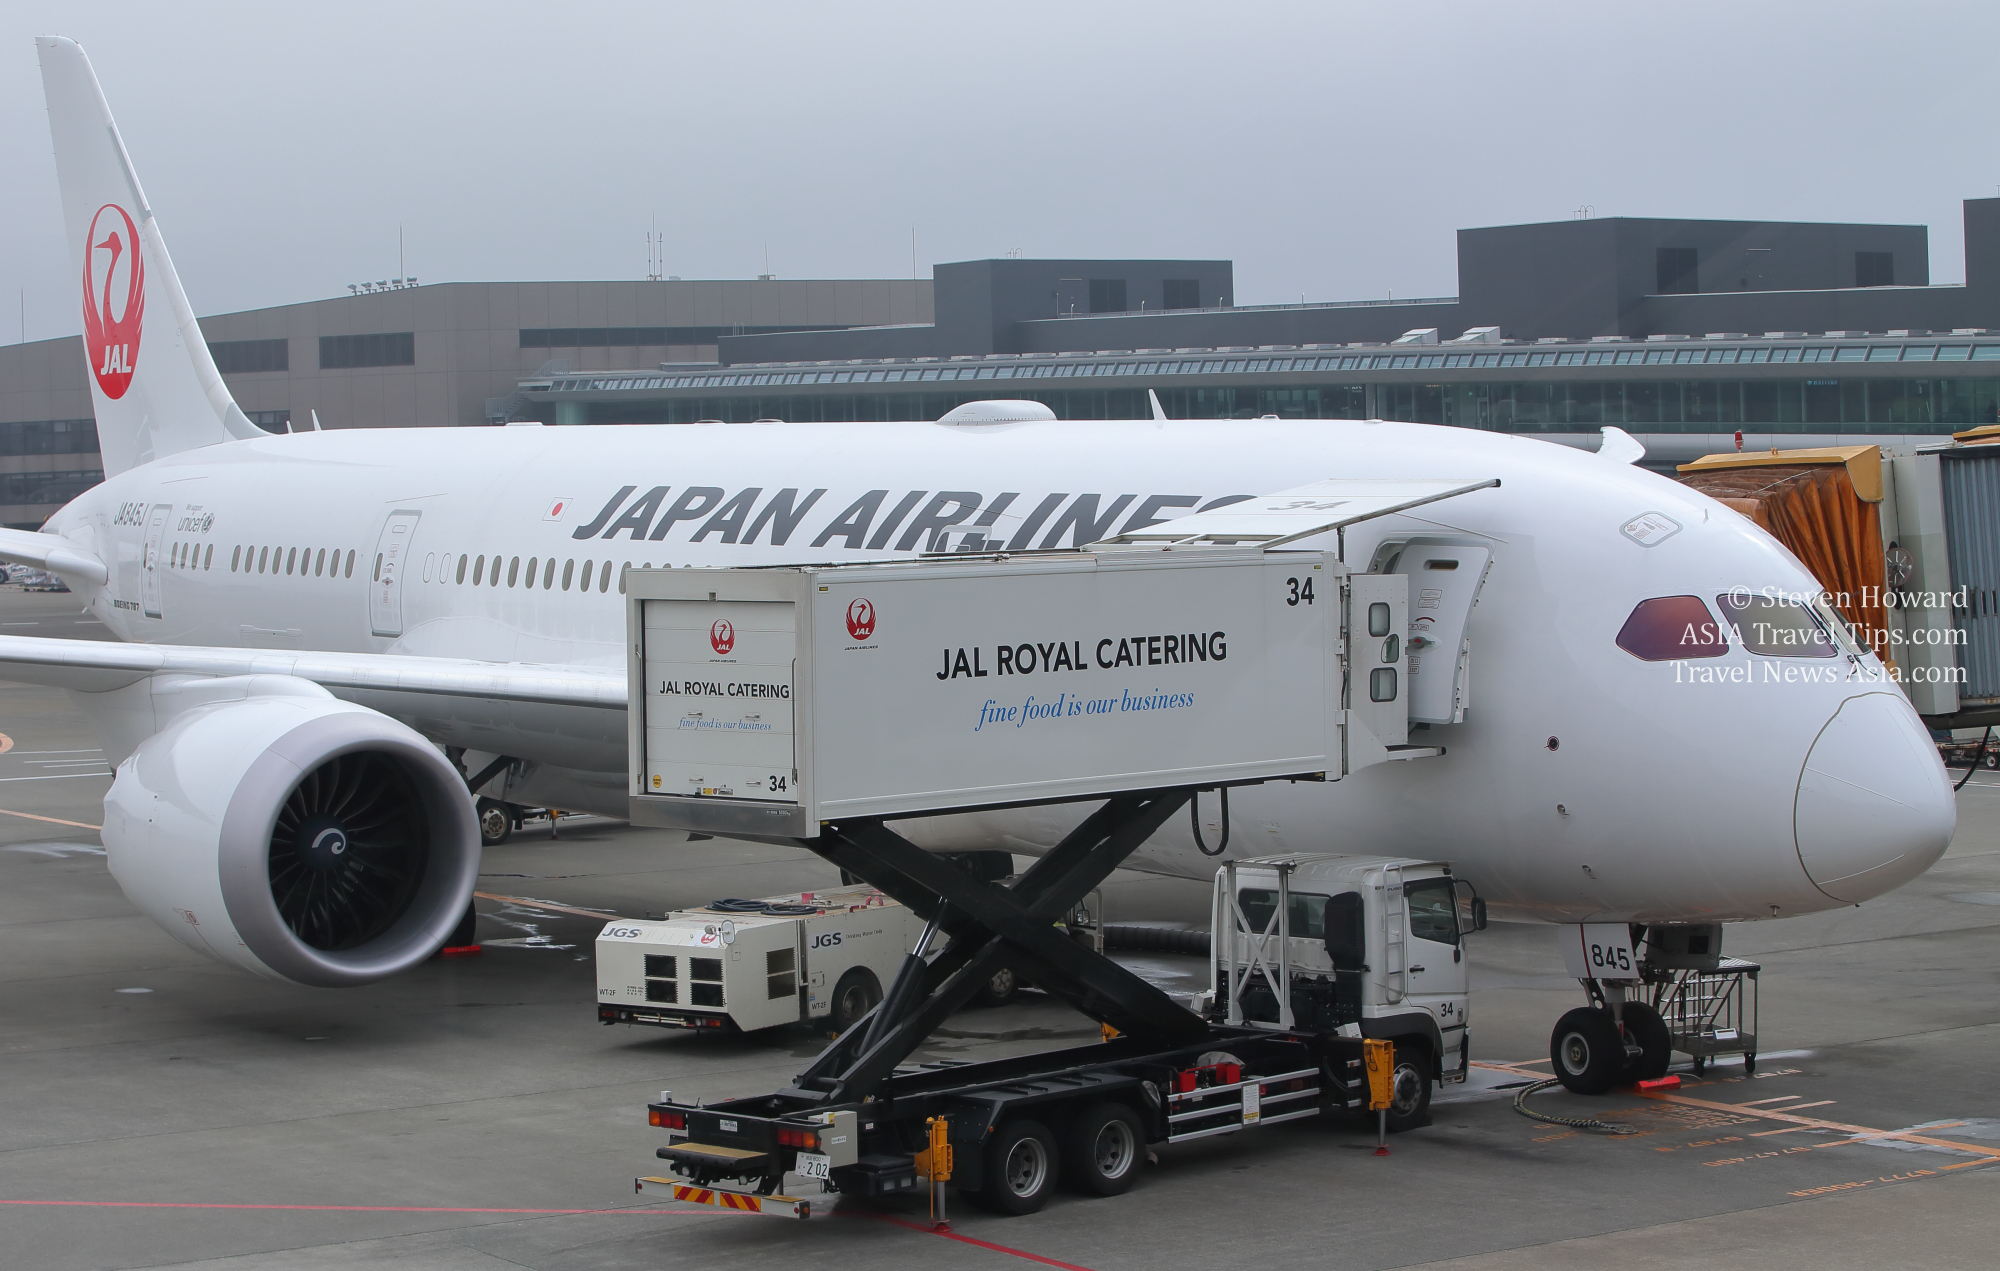 Japan Airlines Boeing 787-8 reg: JA845J. Picture by Steven Howard of TravelNewsAsia.com. Click to enlarge.